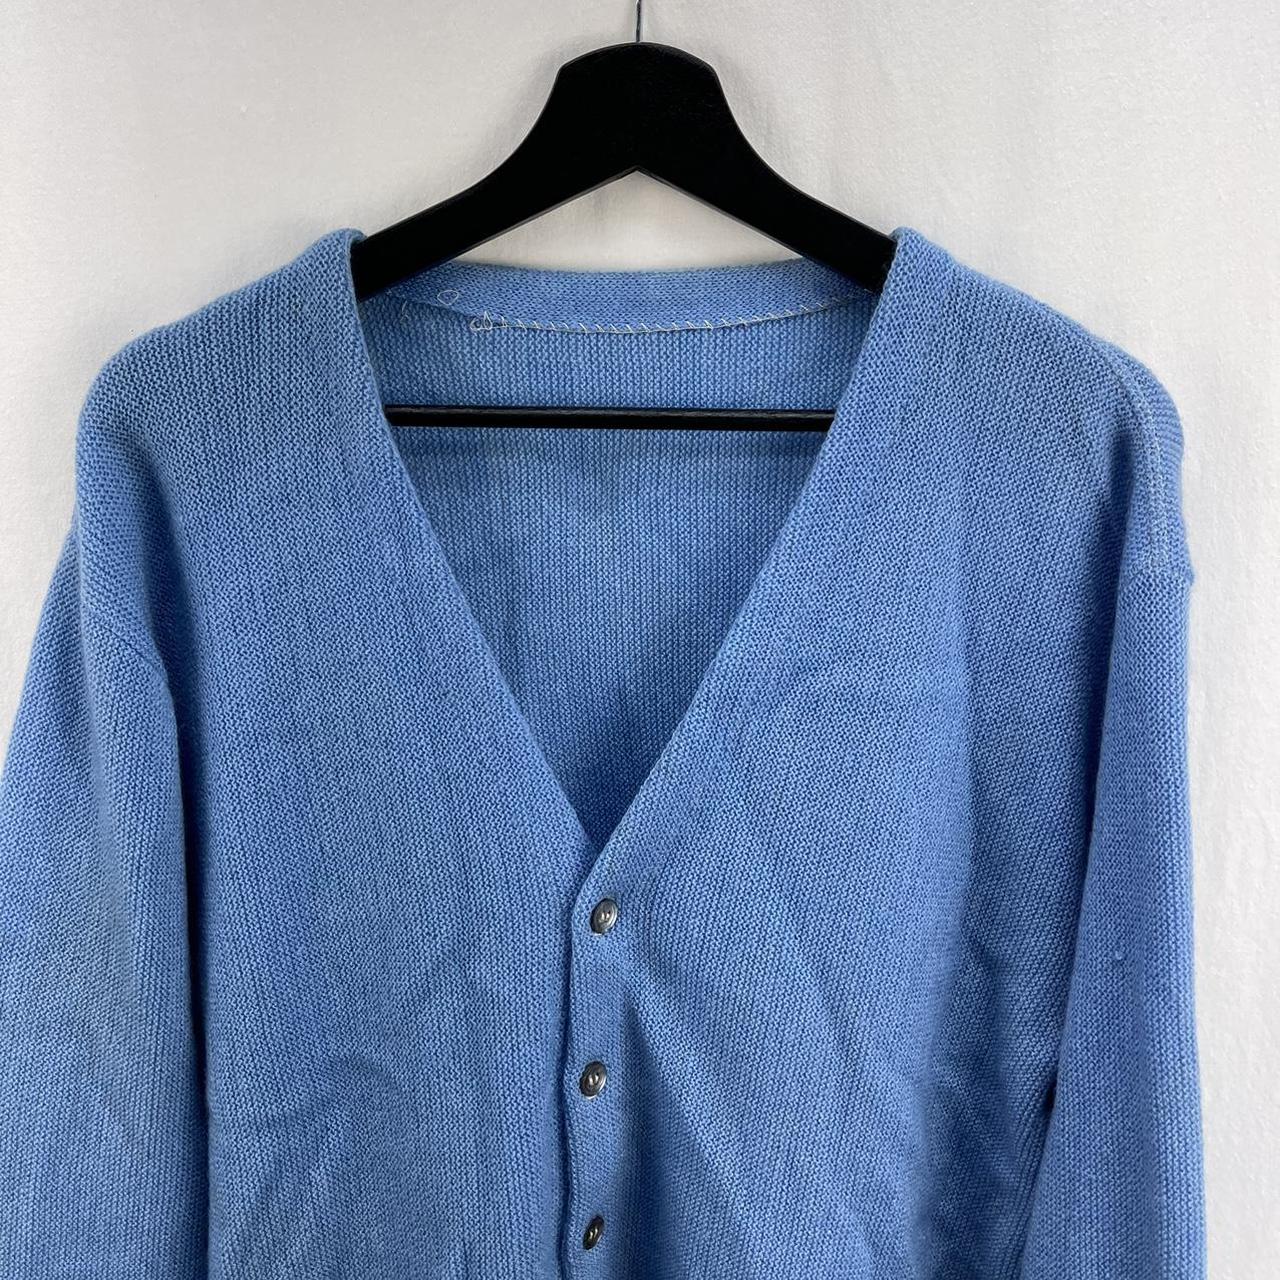 Vintage 60s Home Made Acrylic Knit Cardigan Size... - Depop